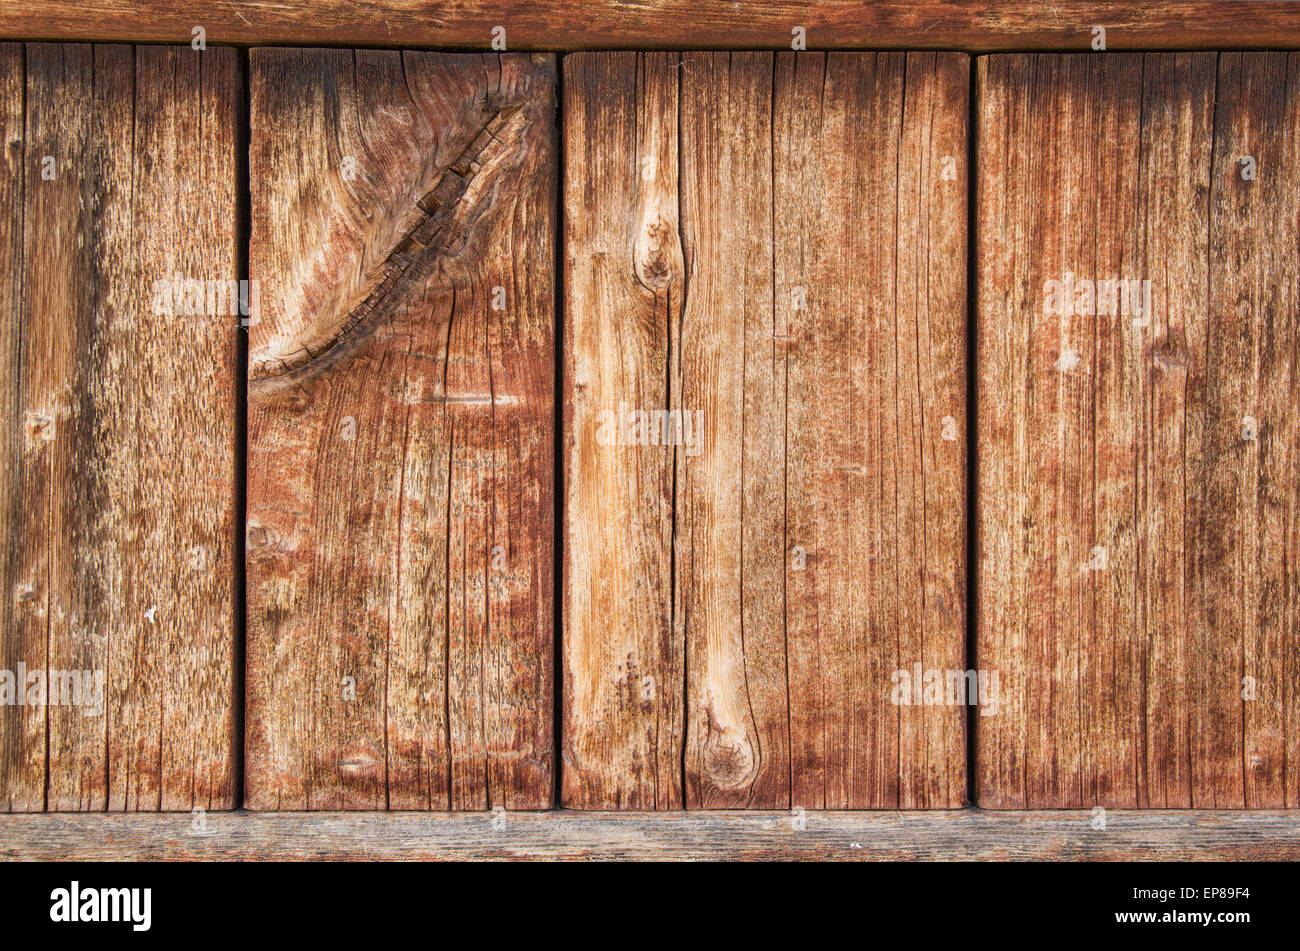 old weathered wood panel with cracking wood grain and fading stain Stock Photo